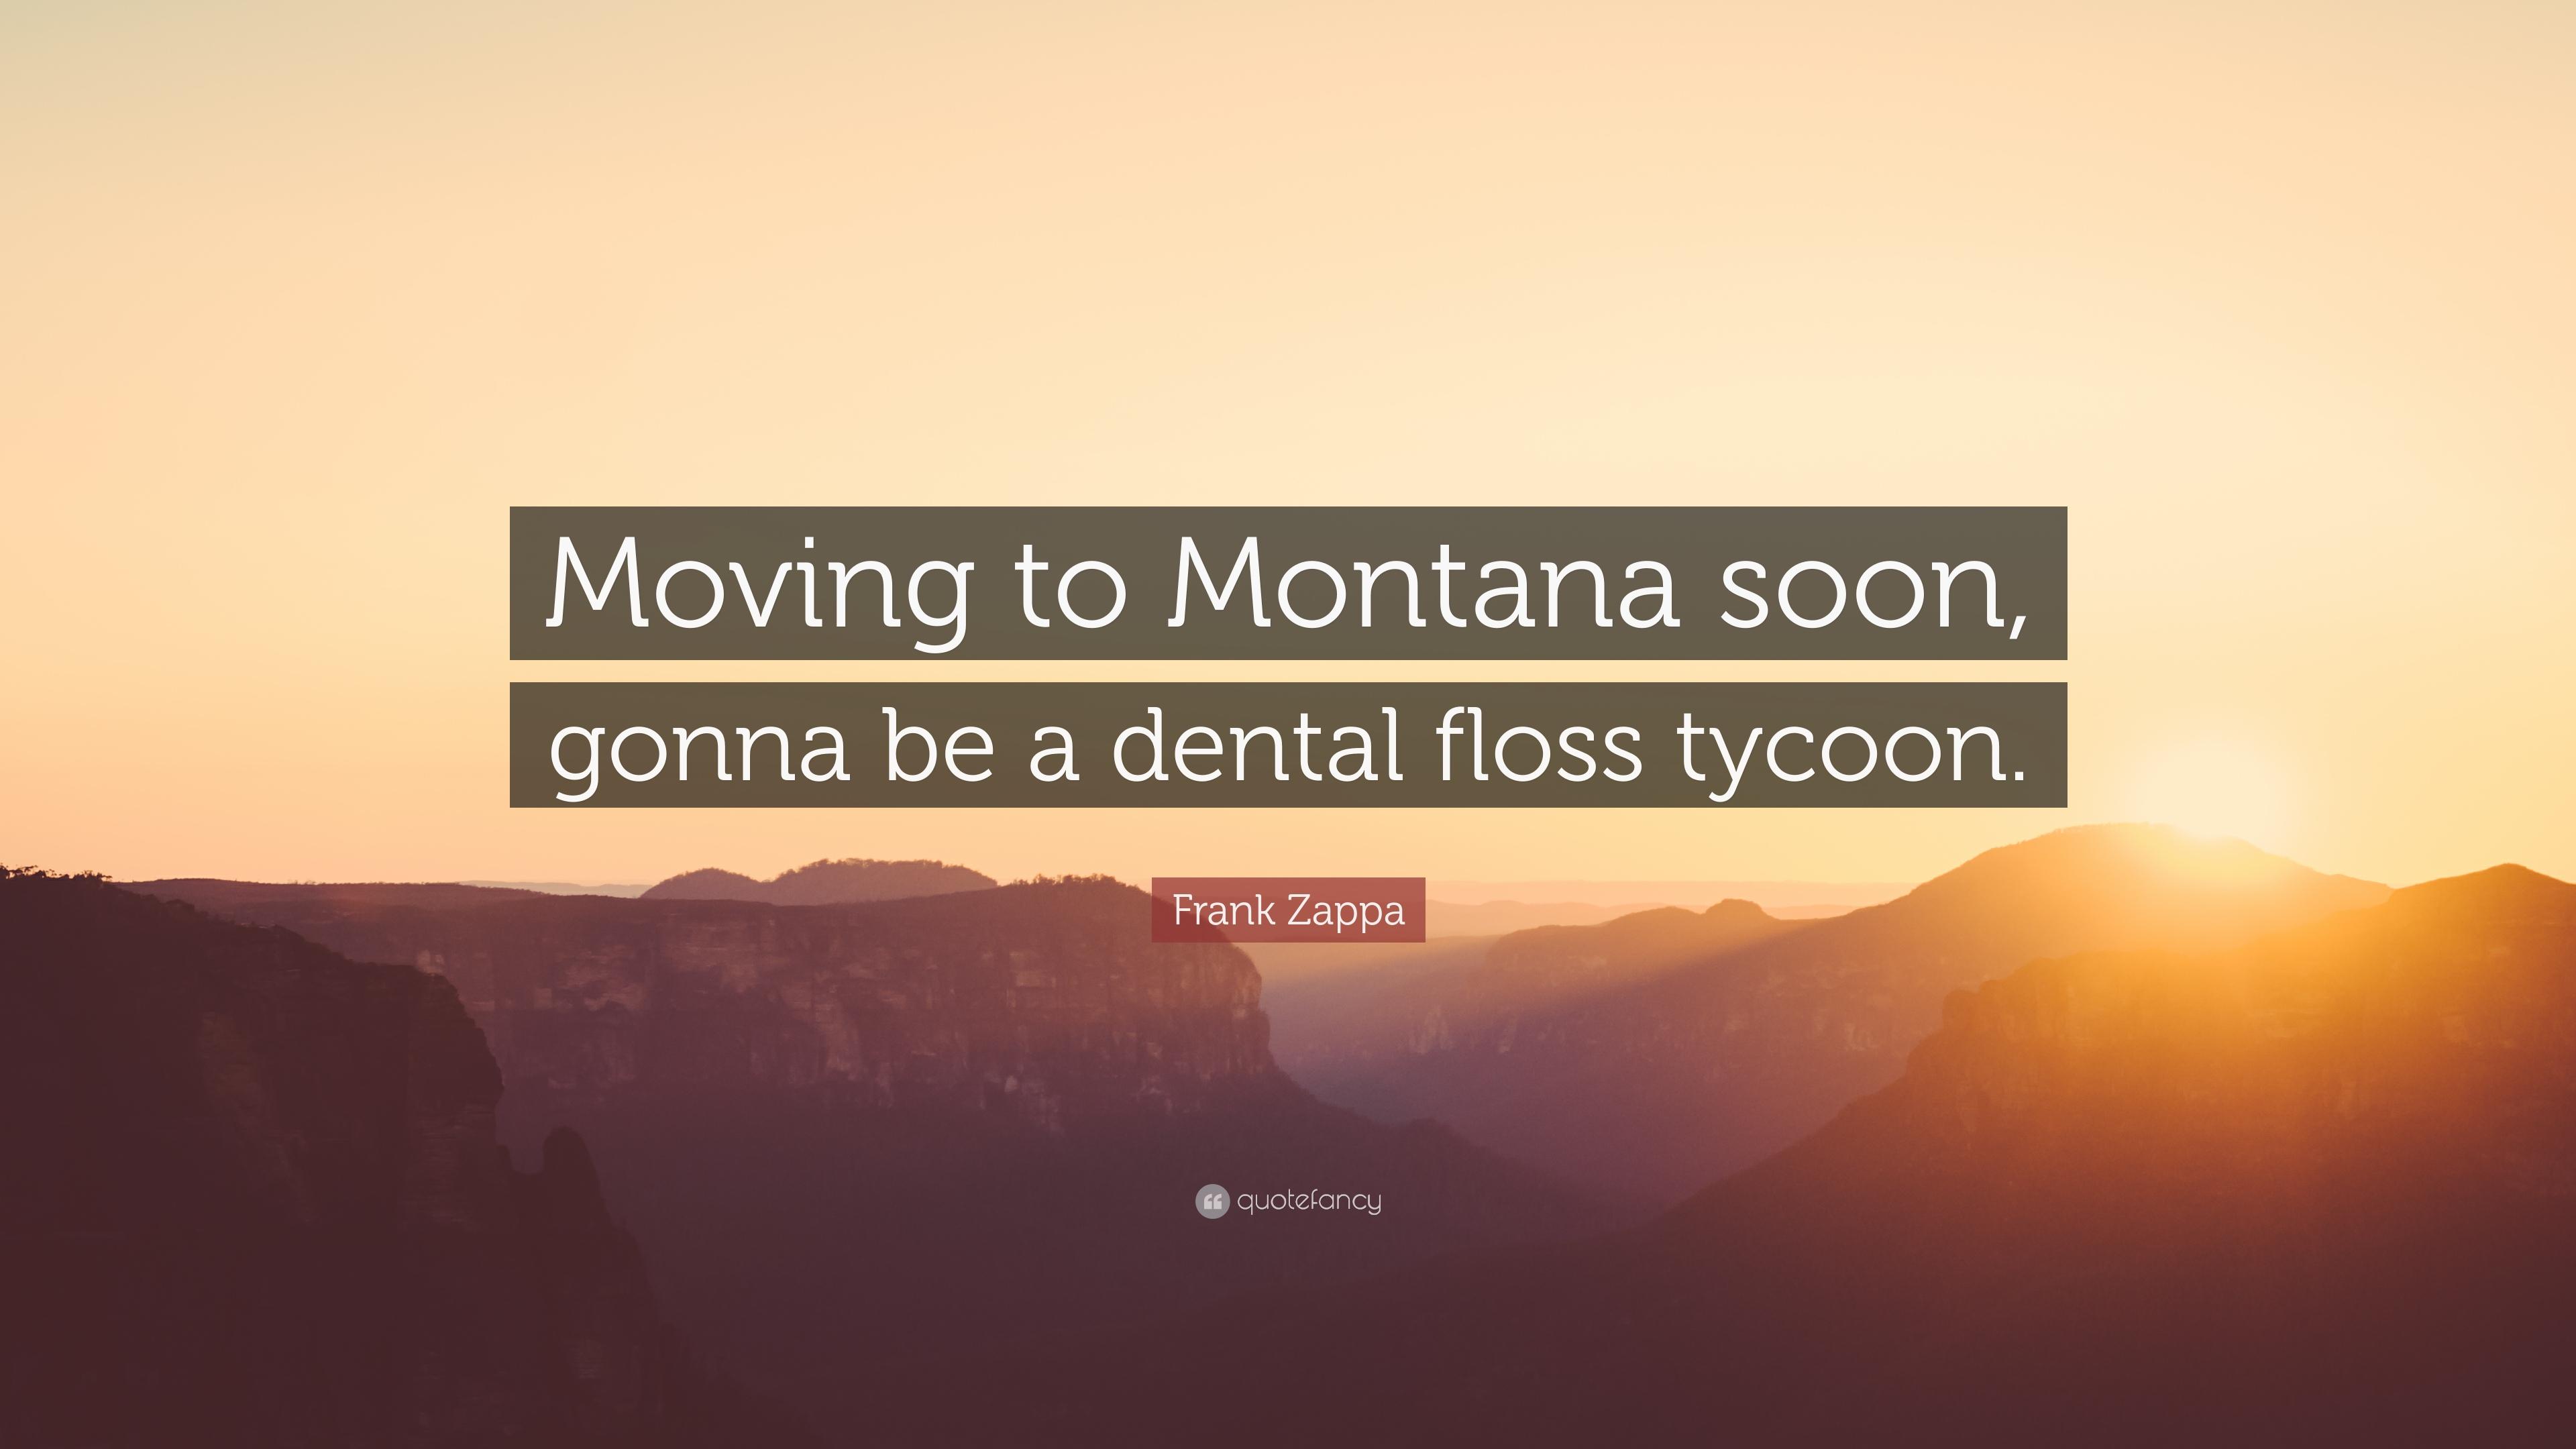 Frank Zappa Quote: “Moving to Montana soon, gonna be a dental floss